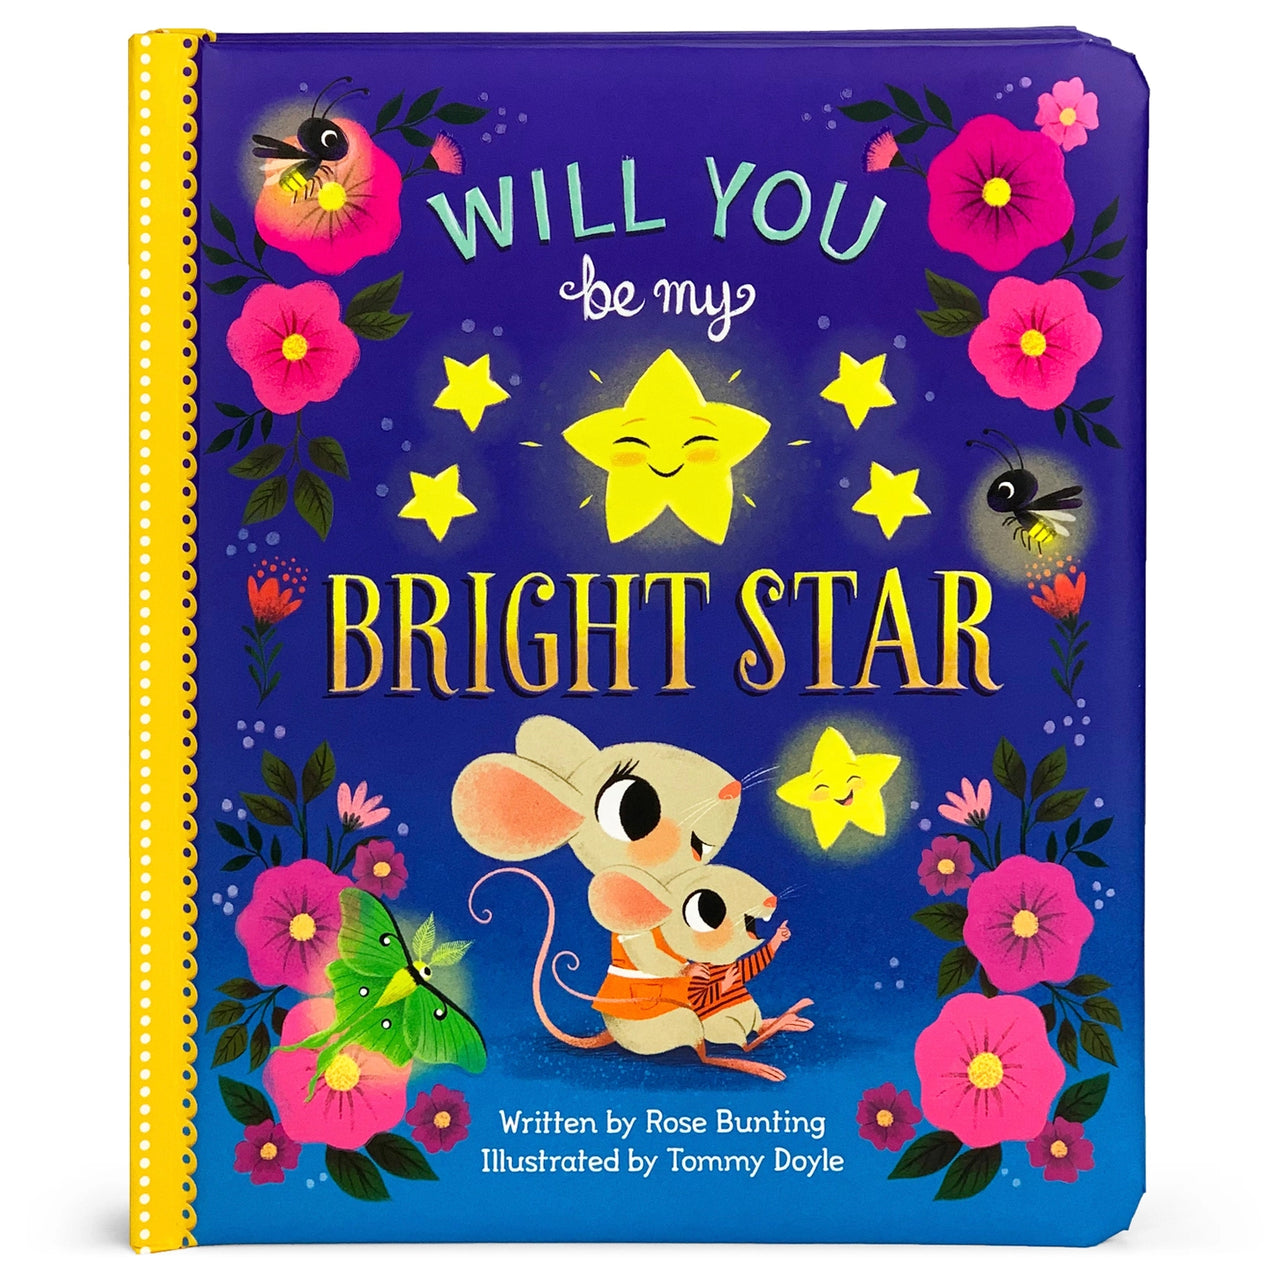 Will You Be My Bright Star?